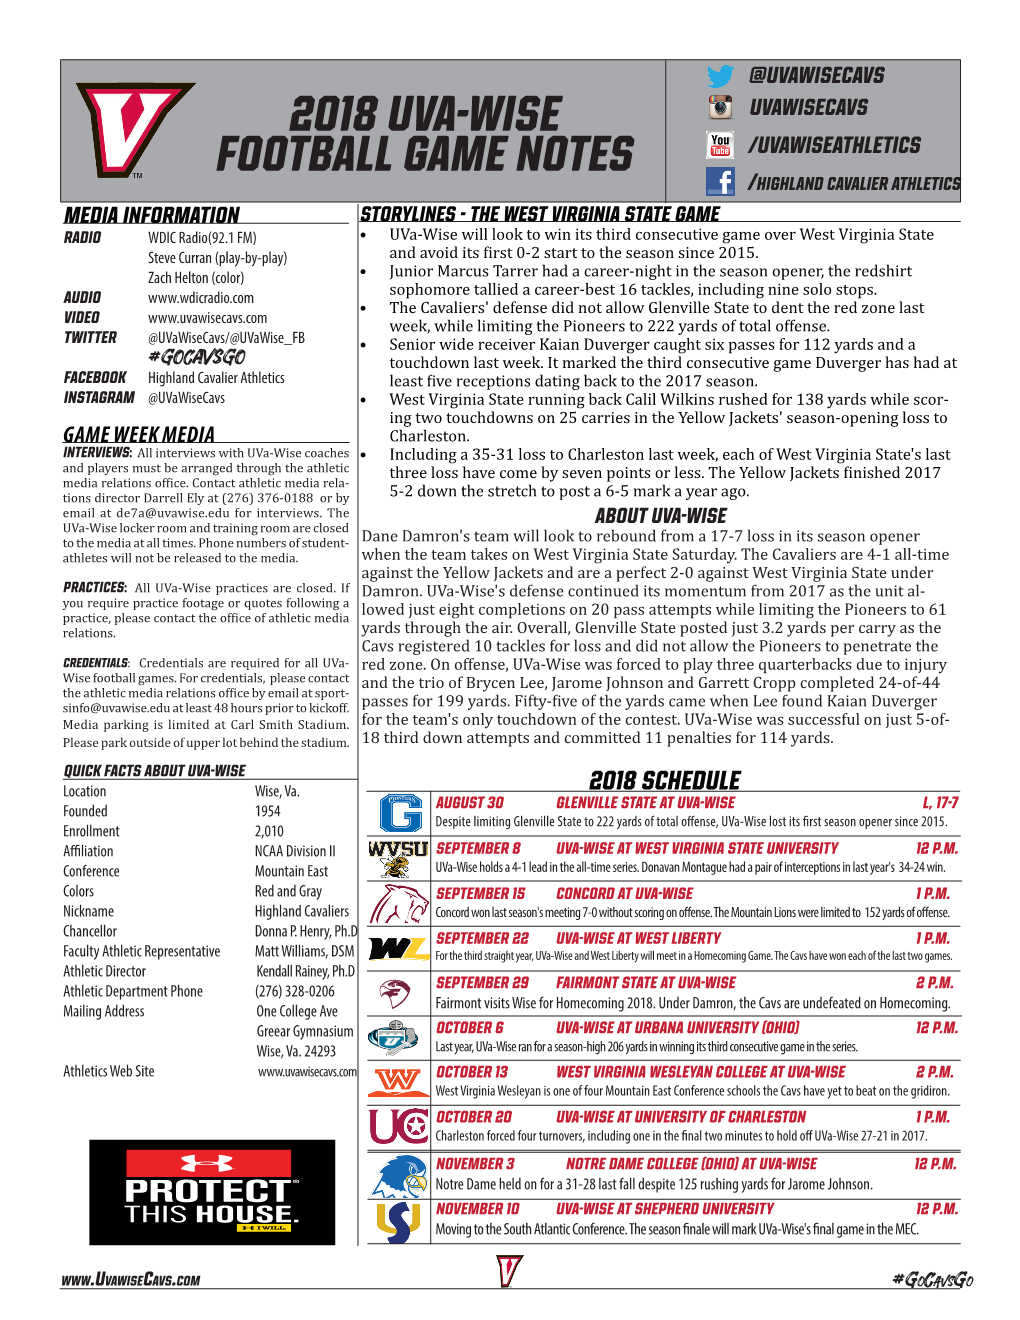 2018 Uva-Wise Football Game Notes